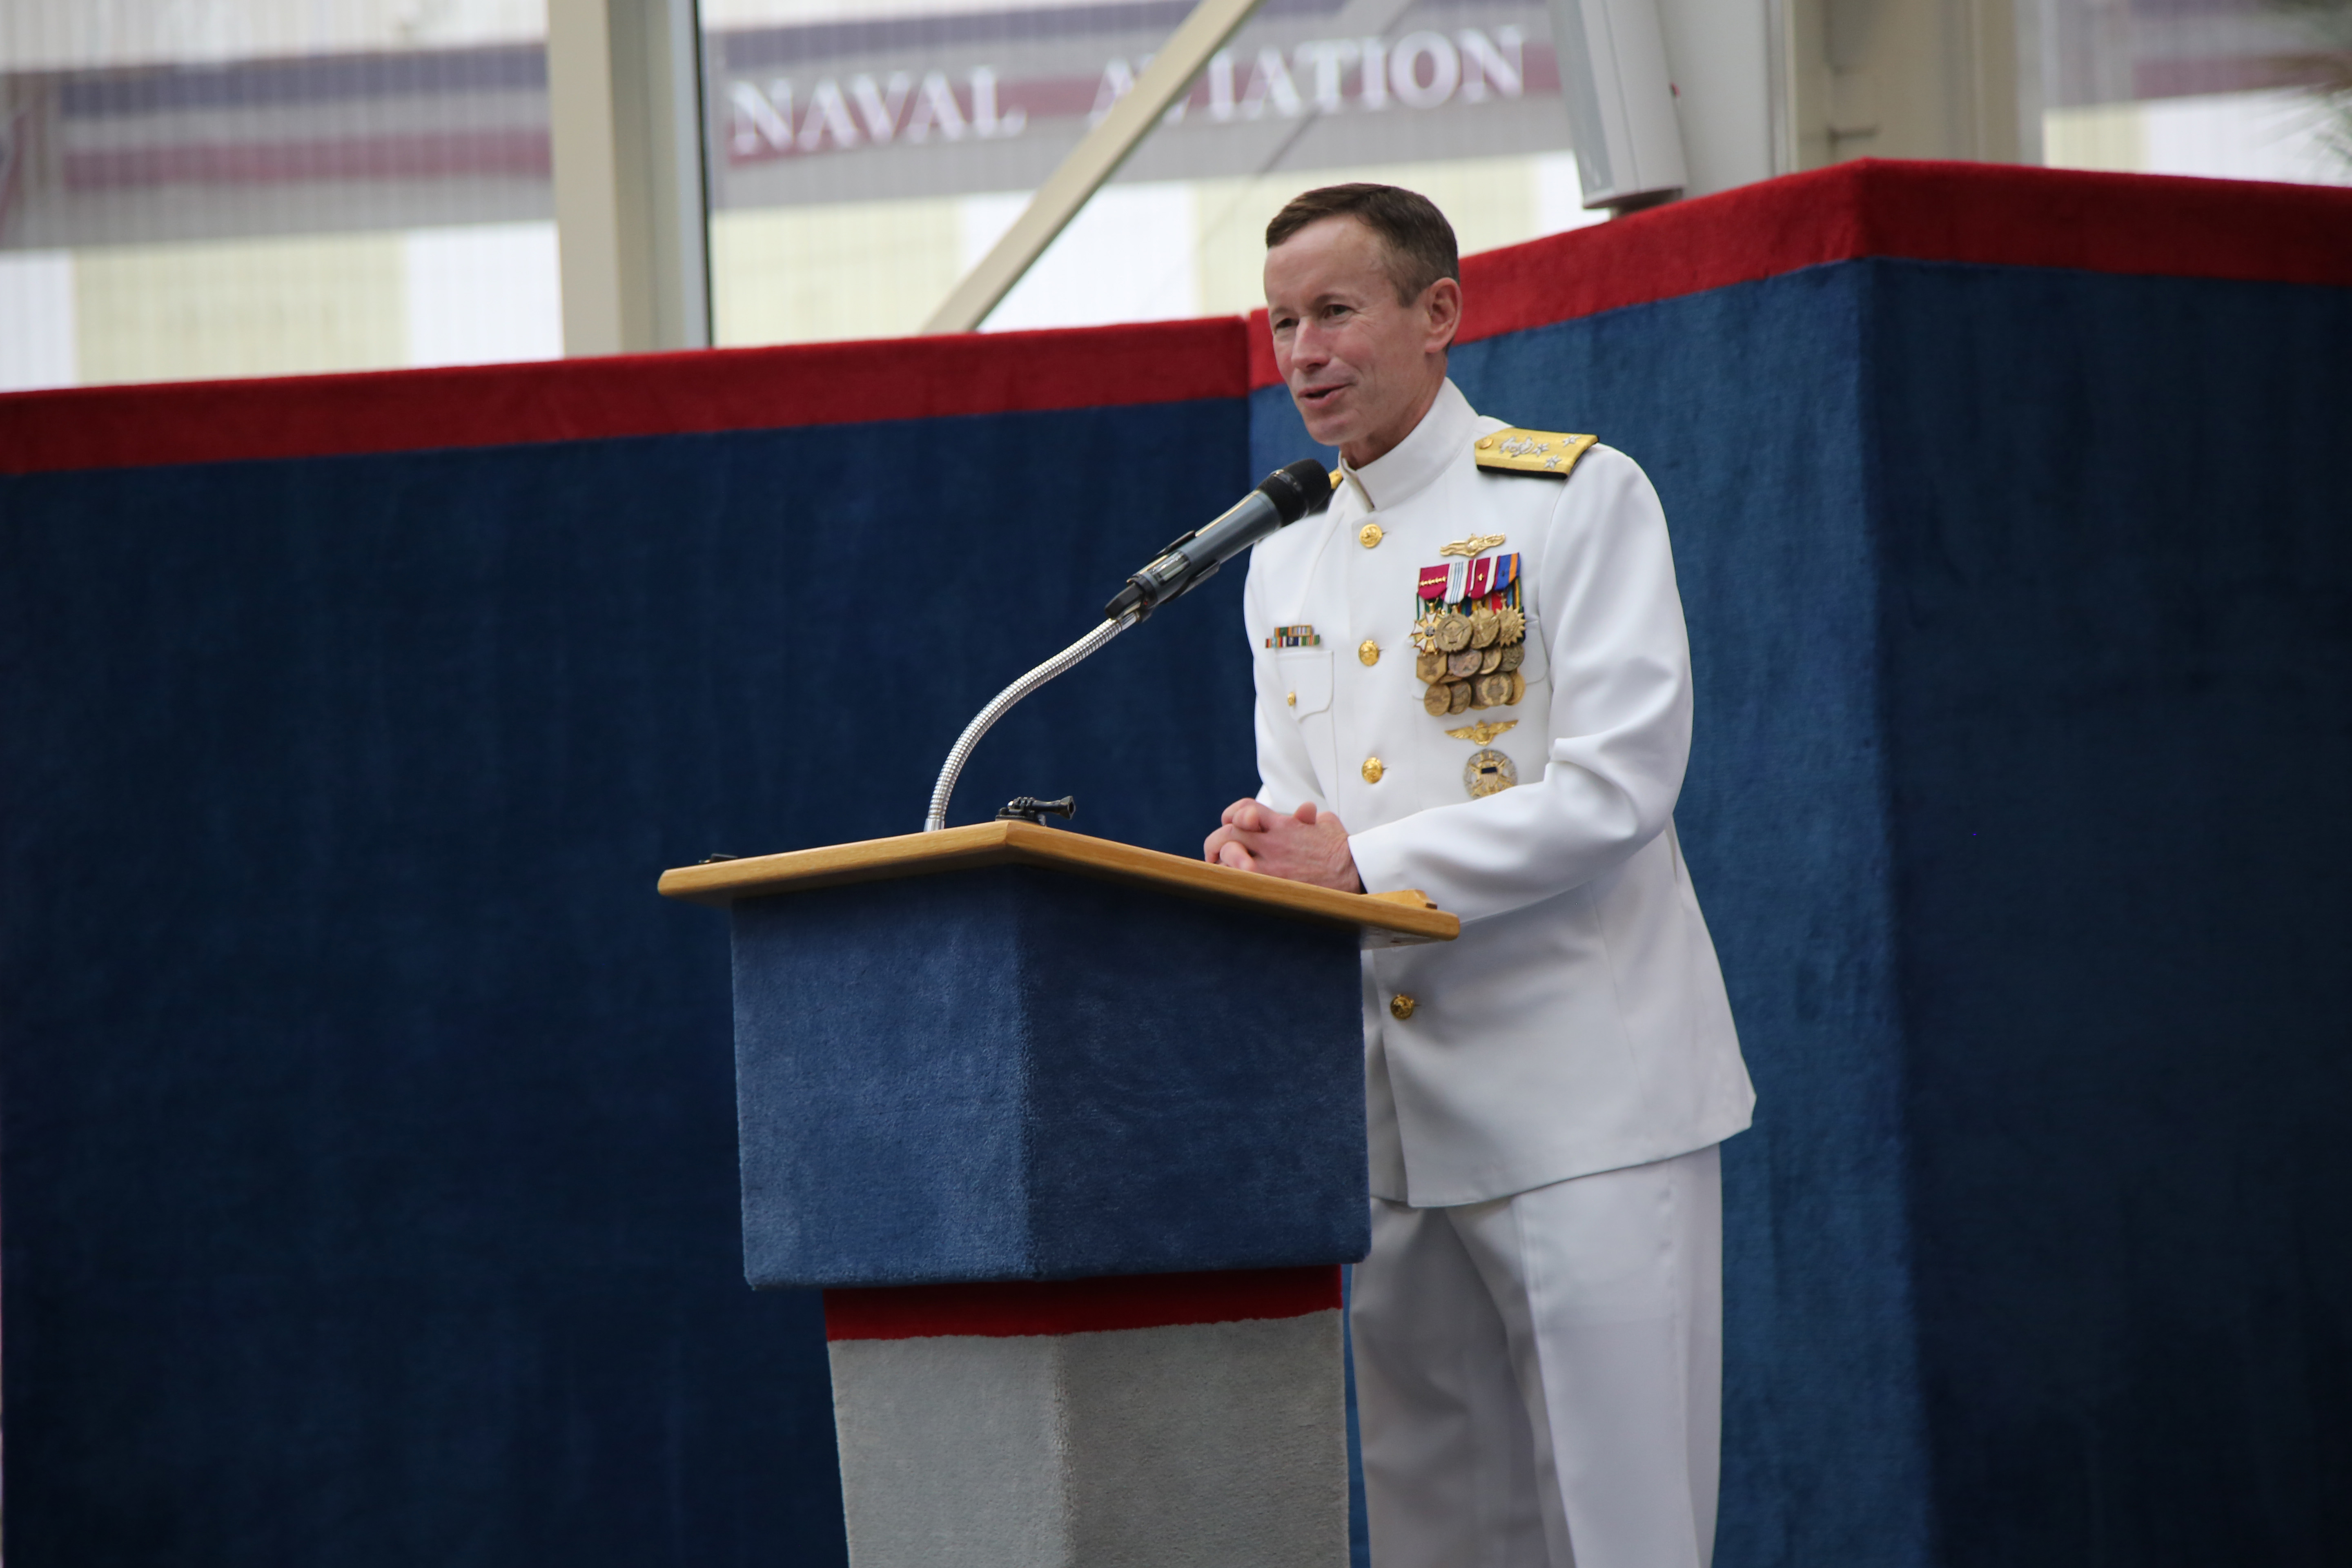 PENSACOLA, Fla. (May 3, 2016) Deputy Chief of Naval Operations for Information Warfare and Director of Naval Intelligence Vice Adm.Ted Branch addresses the audience at the Center for Information Dominance (CID) change of command ceremony. During the event, held at the National Museum of Naval Aviation, Capt. Maureen Fox turned command over to Capt. William Lintz. U.S. Navy photo by Joy Samsel.